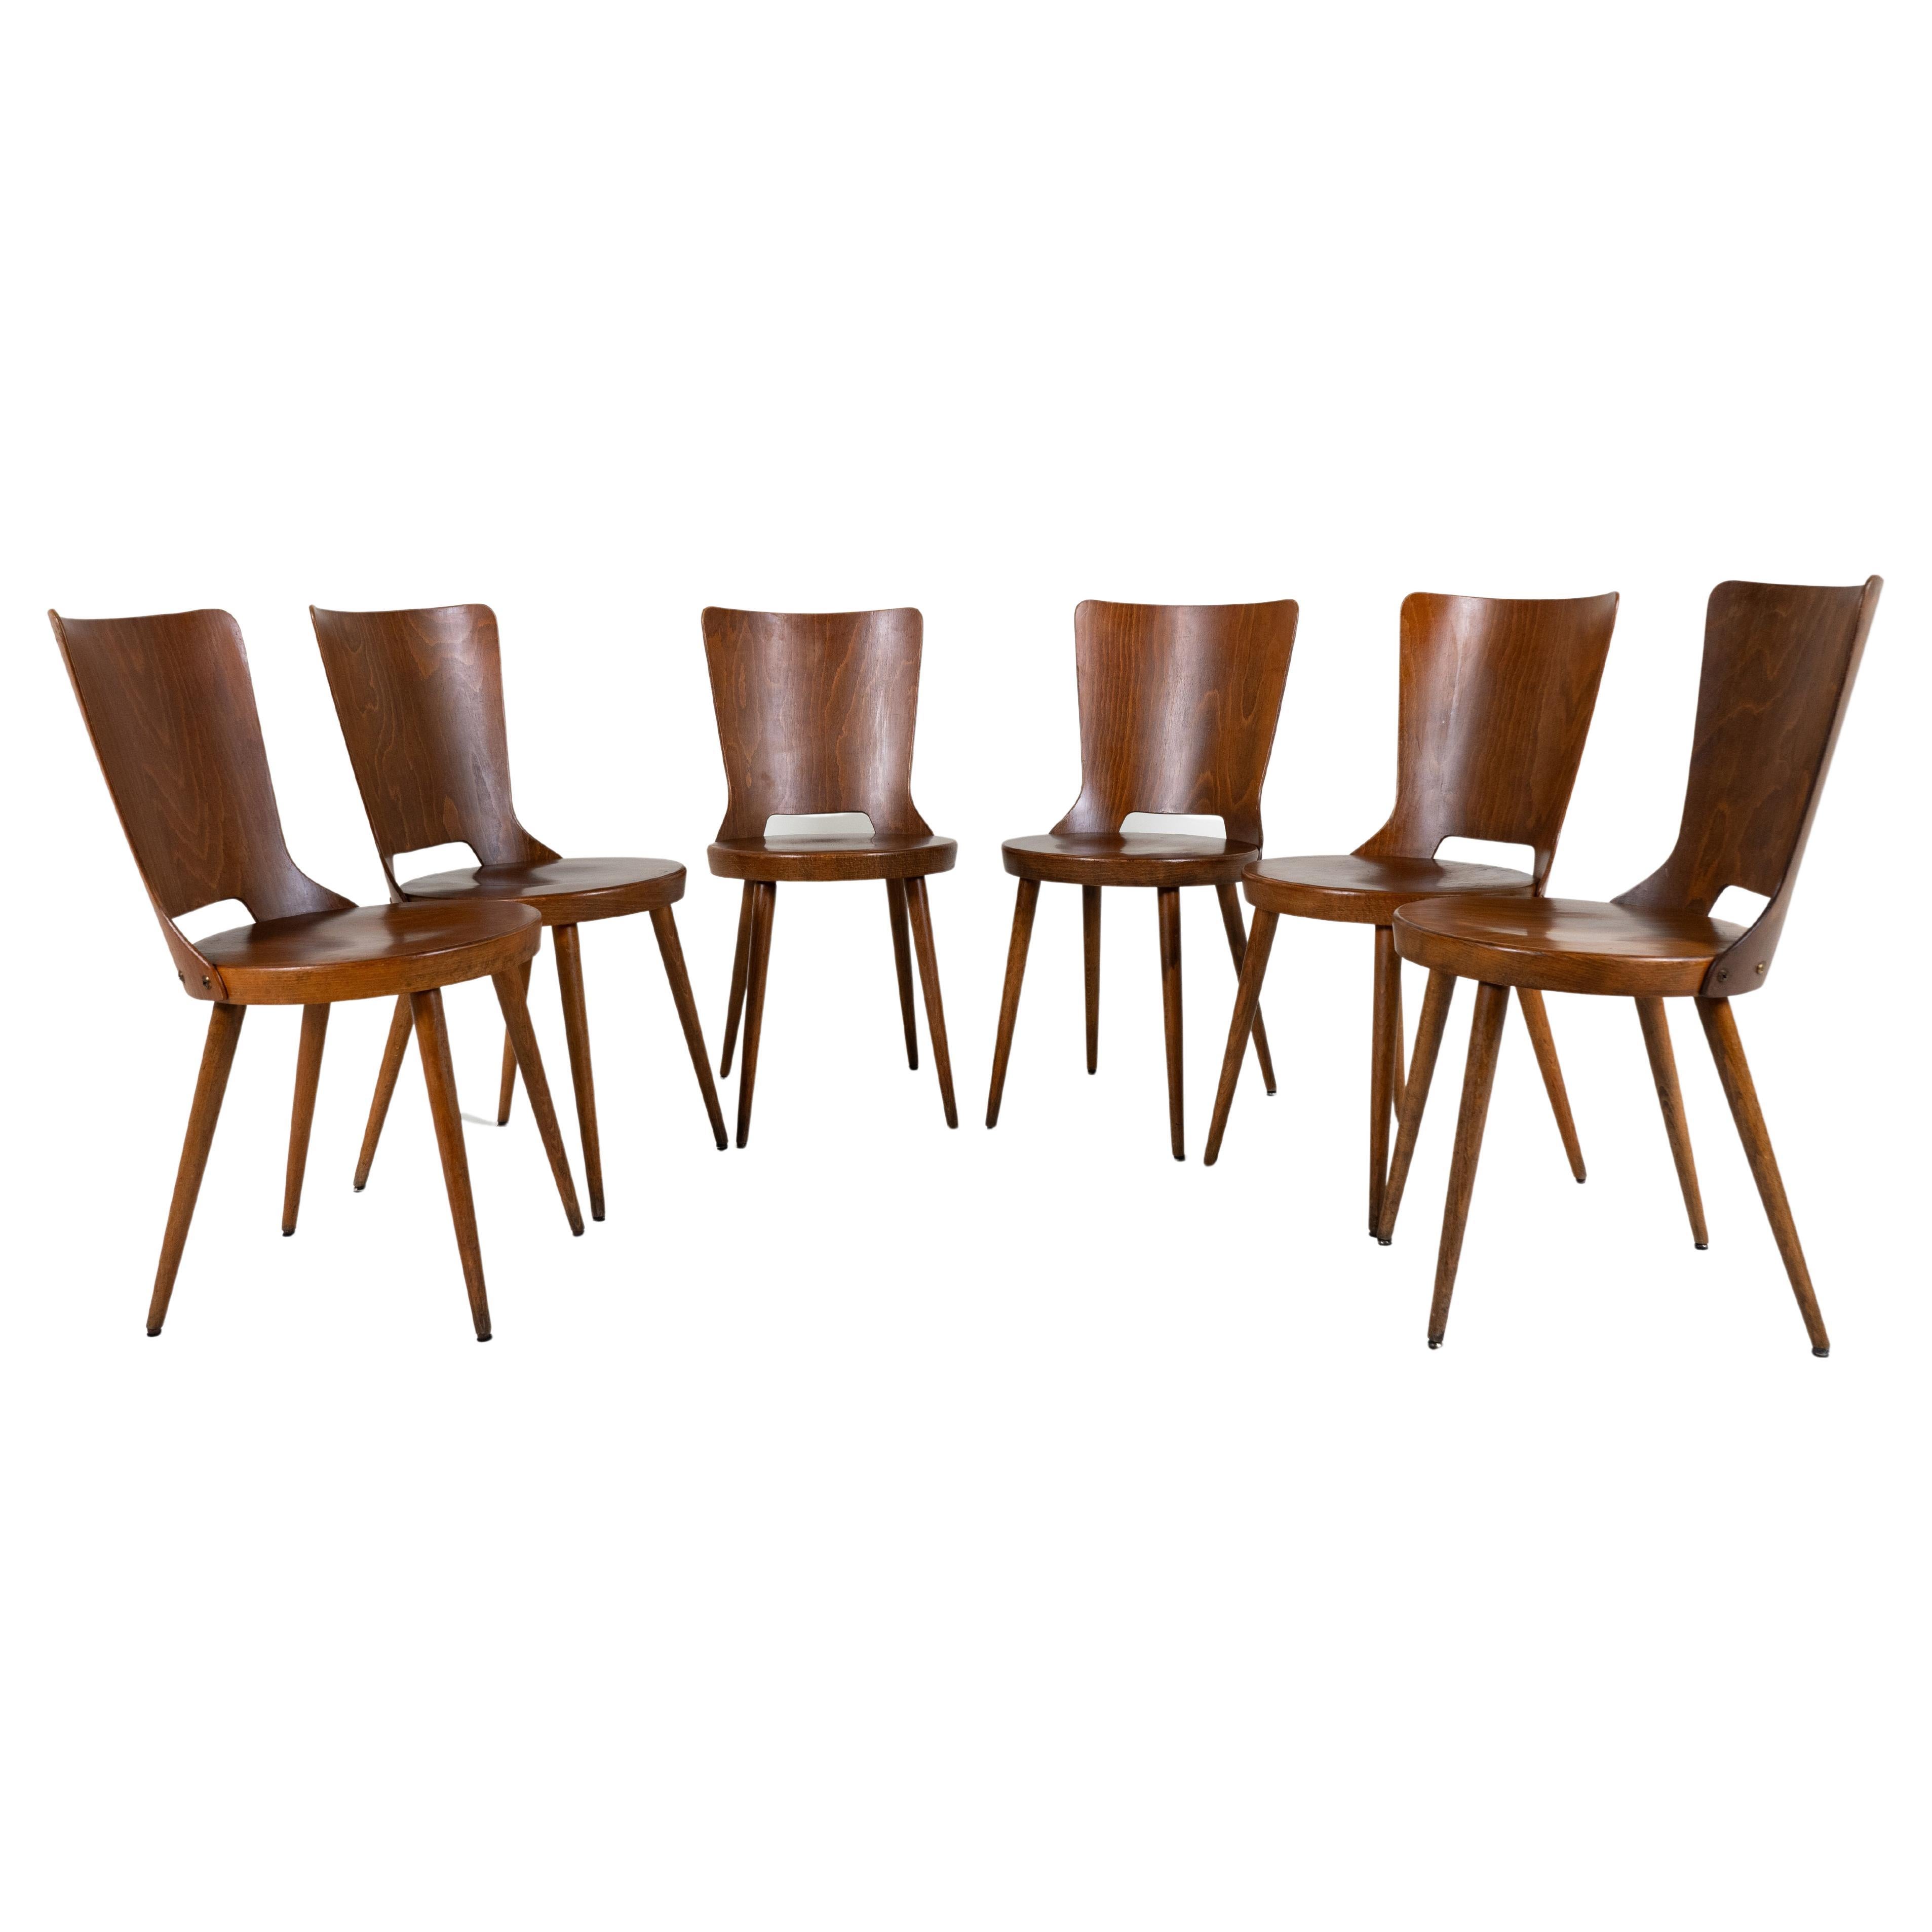 A Set of 6 French Bistro Chairs, c.1970 For Sale